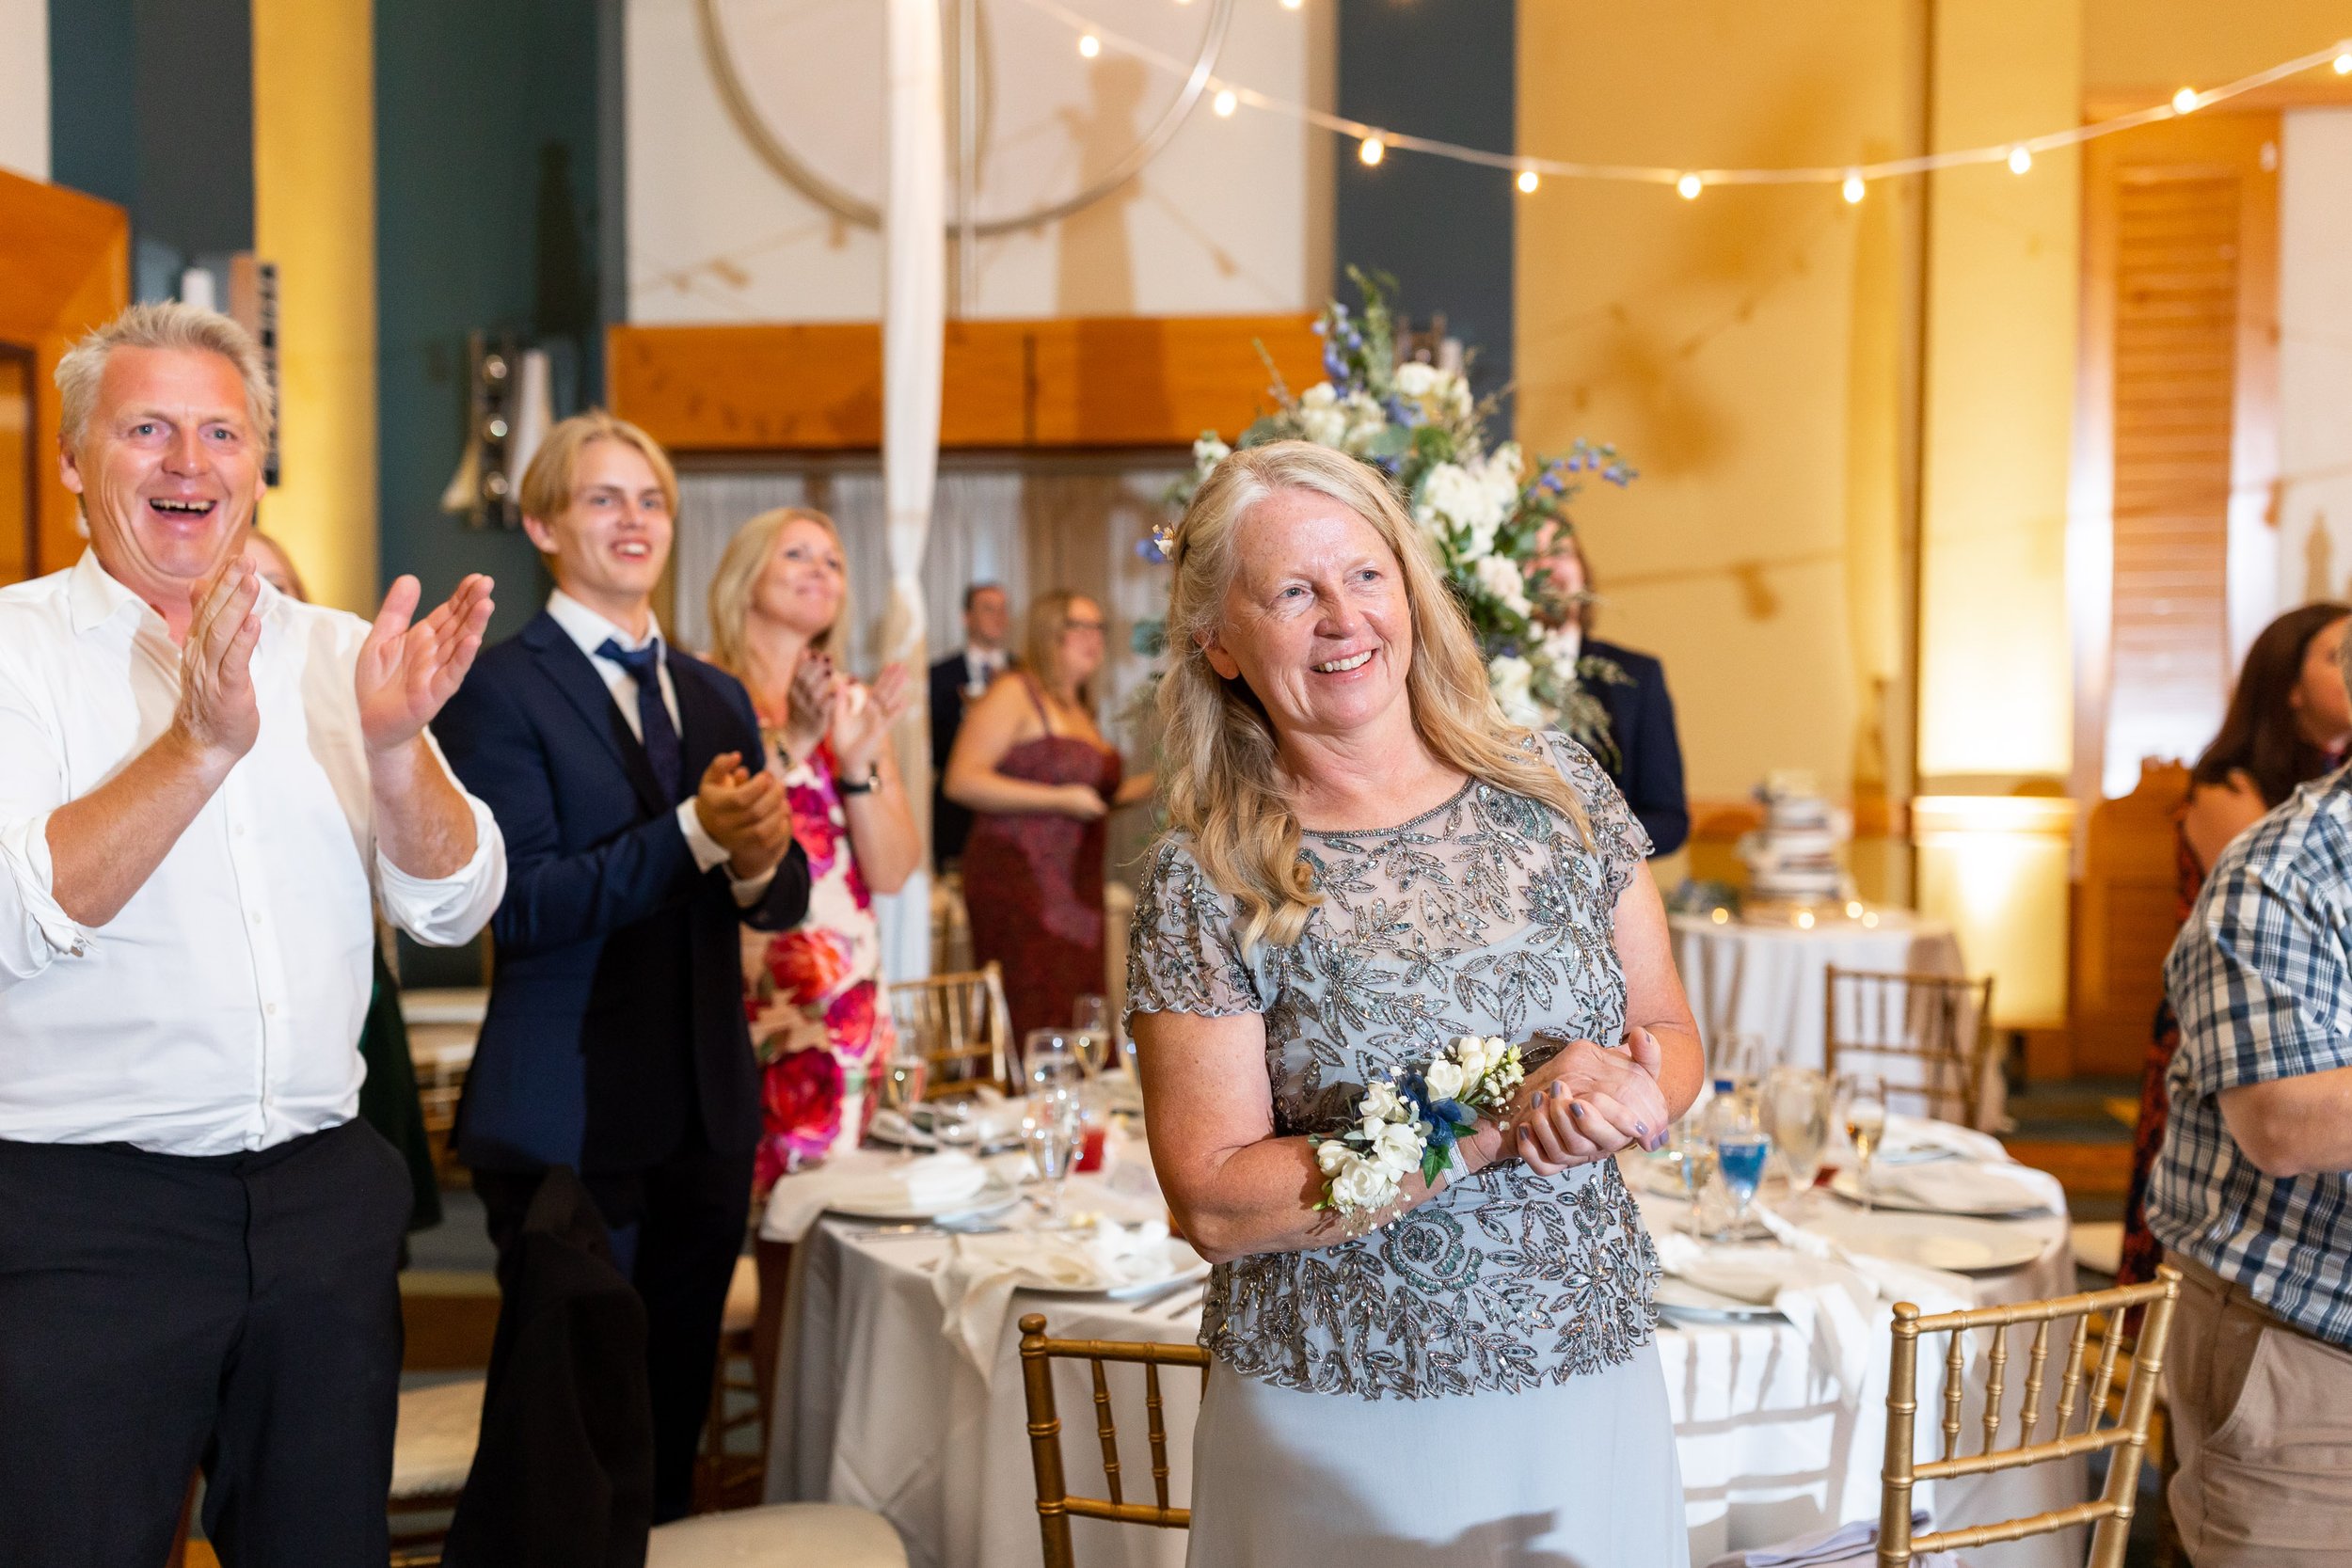 Mother of the groom watches first dance during fun wedding